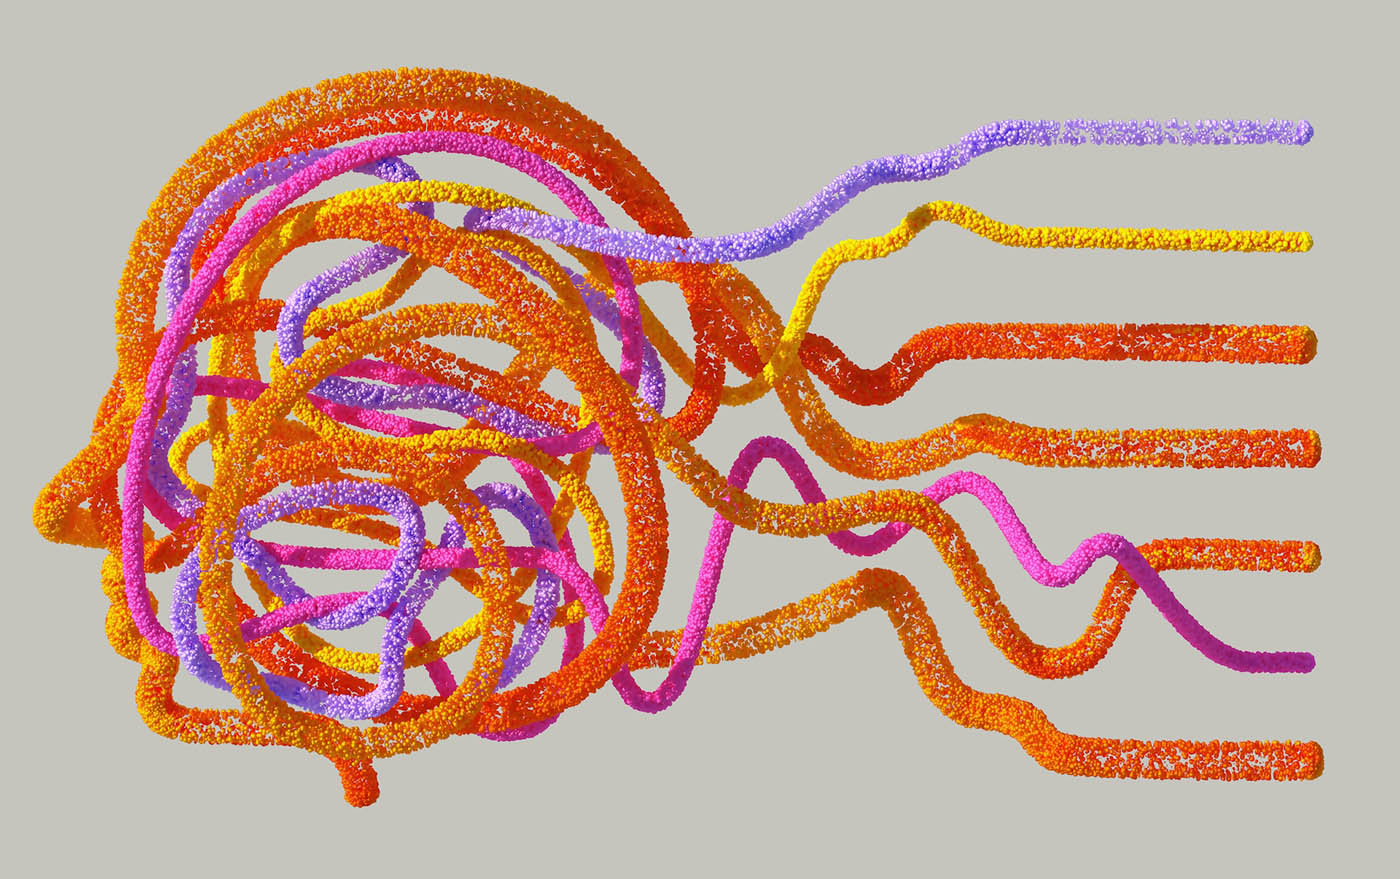 AI generated image depicting lots of different data flowing into a brain and getting jumbled up.